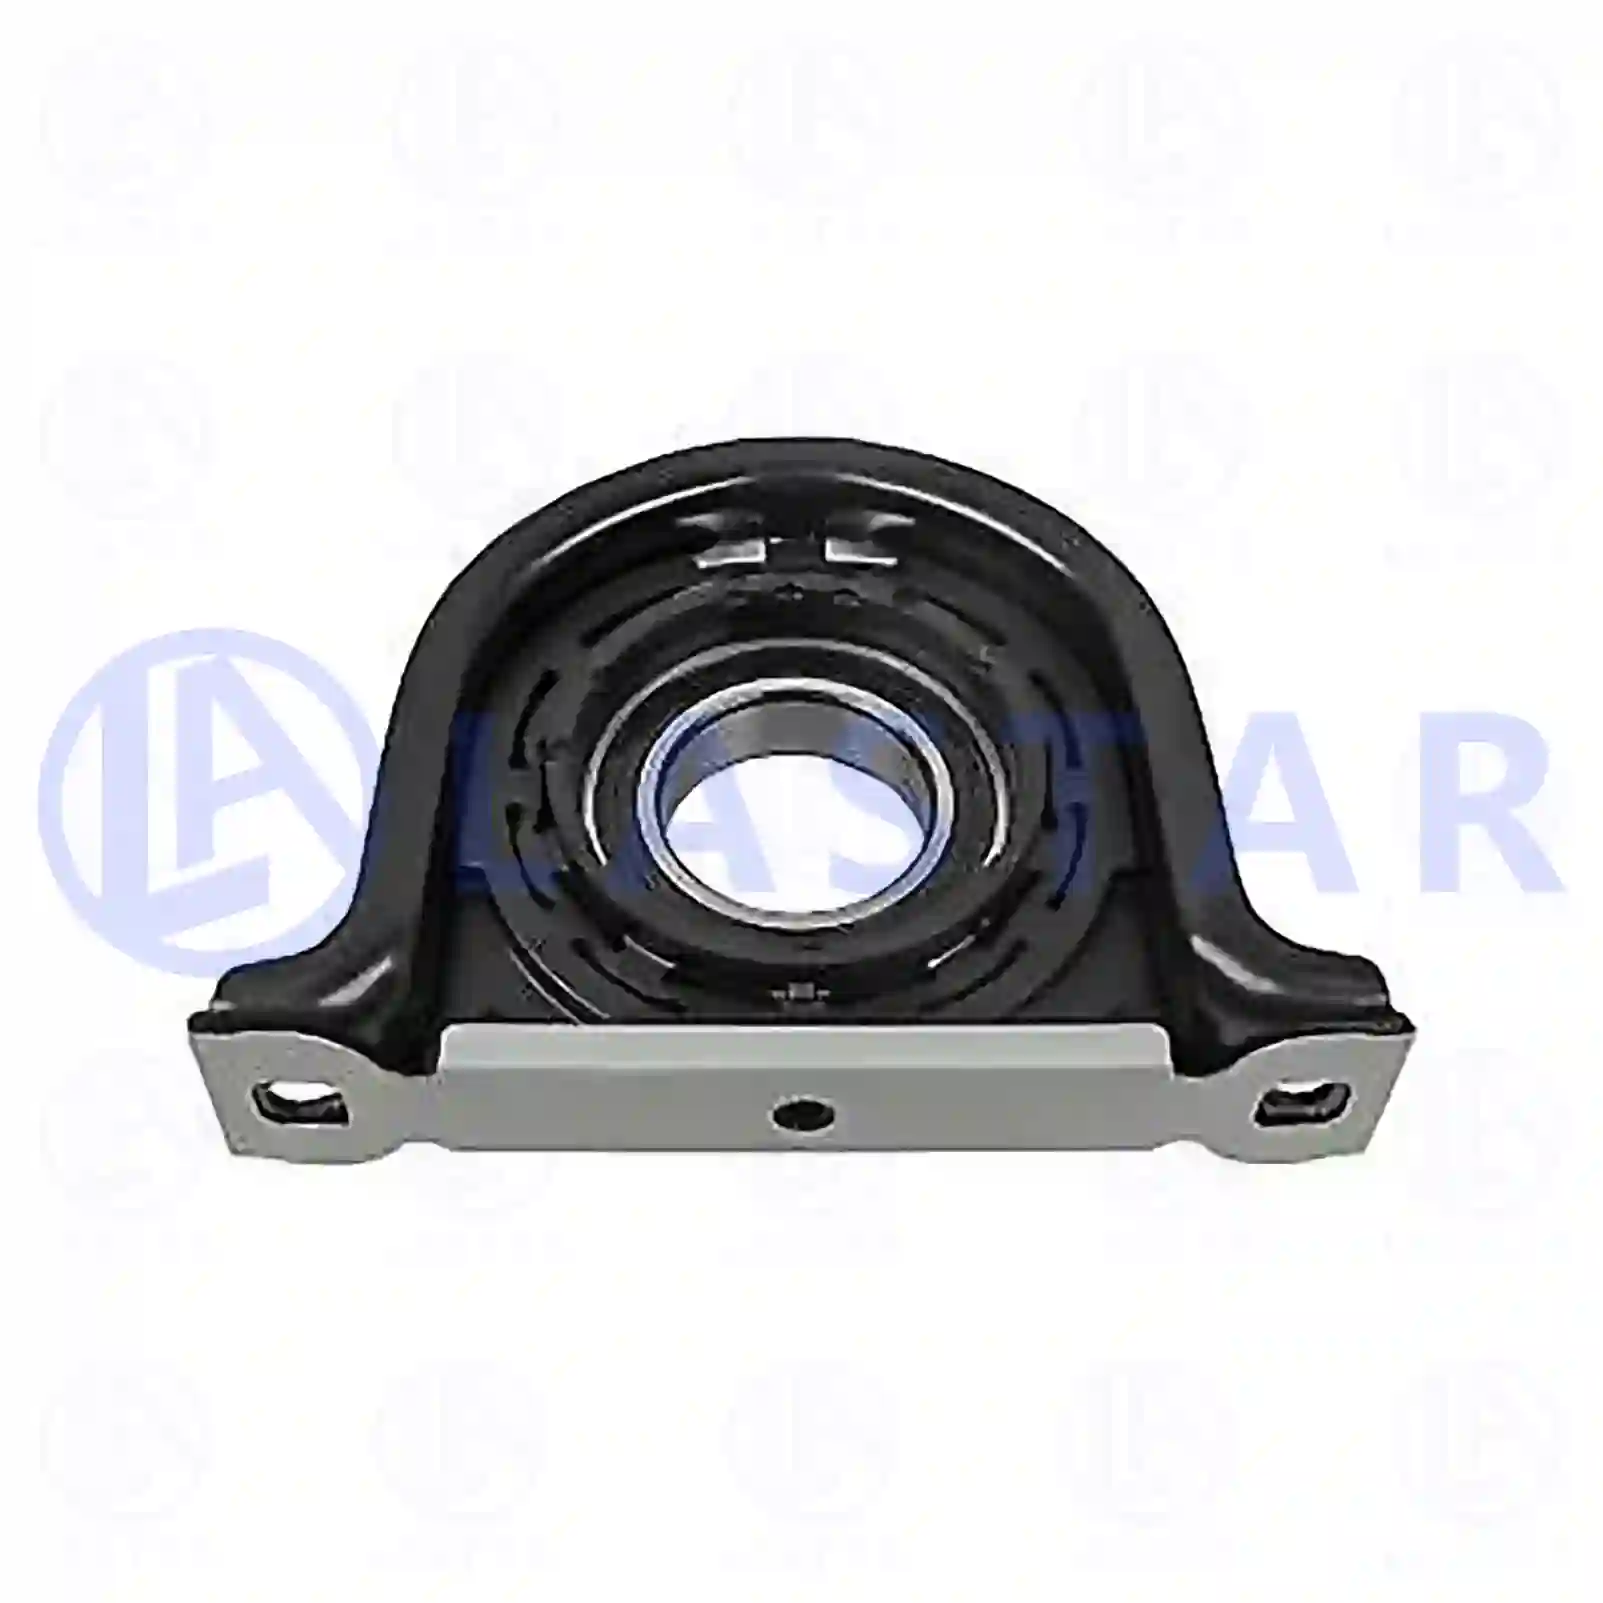 Support Bearing Center bearing, la no: 77734332 ,  oem no:7420876232, 20876232, ZG02501-0008 Lastar Spare Part | Truck Spare Parts, Auotomotive Spare Parts